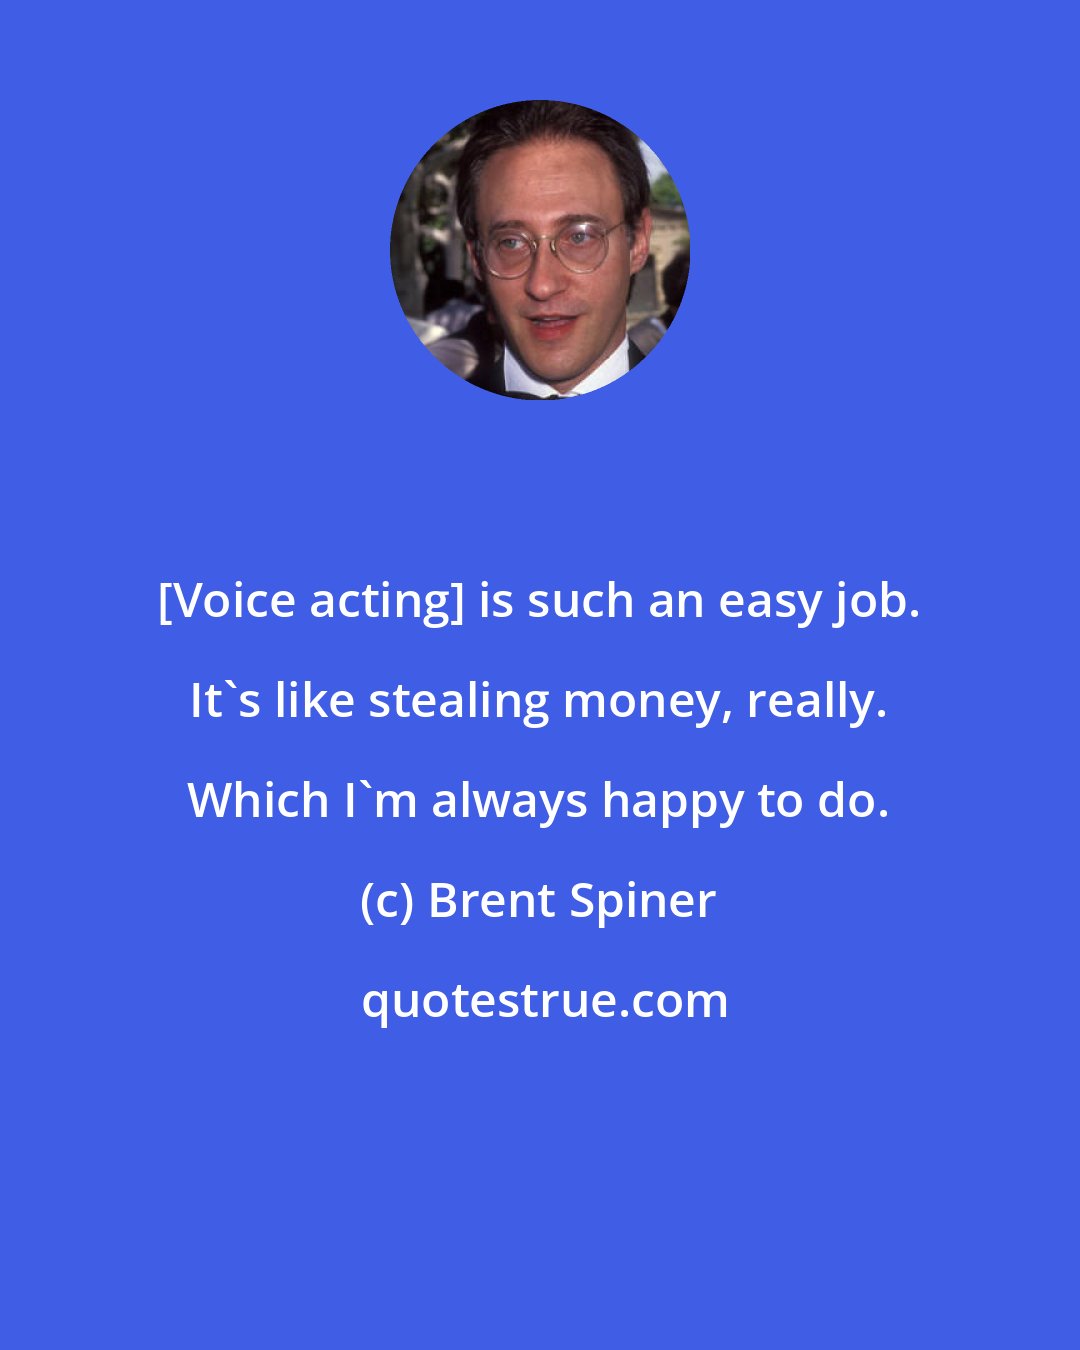 Brent Spiner: [Voice acting] is such an easy job. It's like stealing money, really. Which I'm always happy to do.